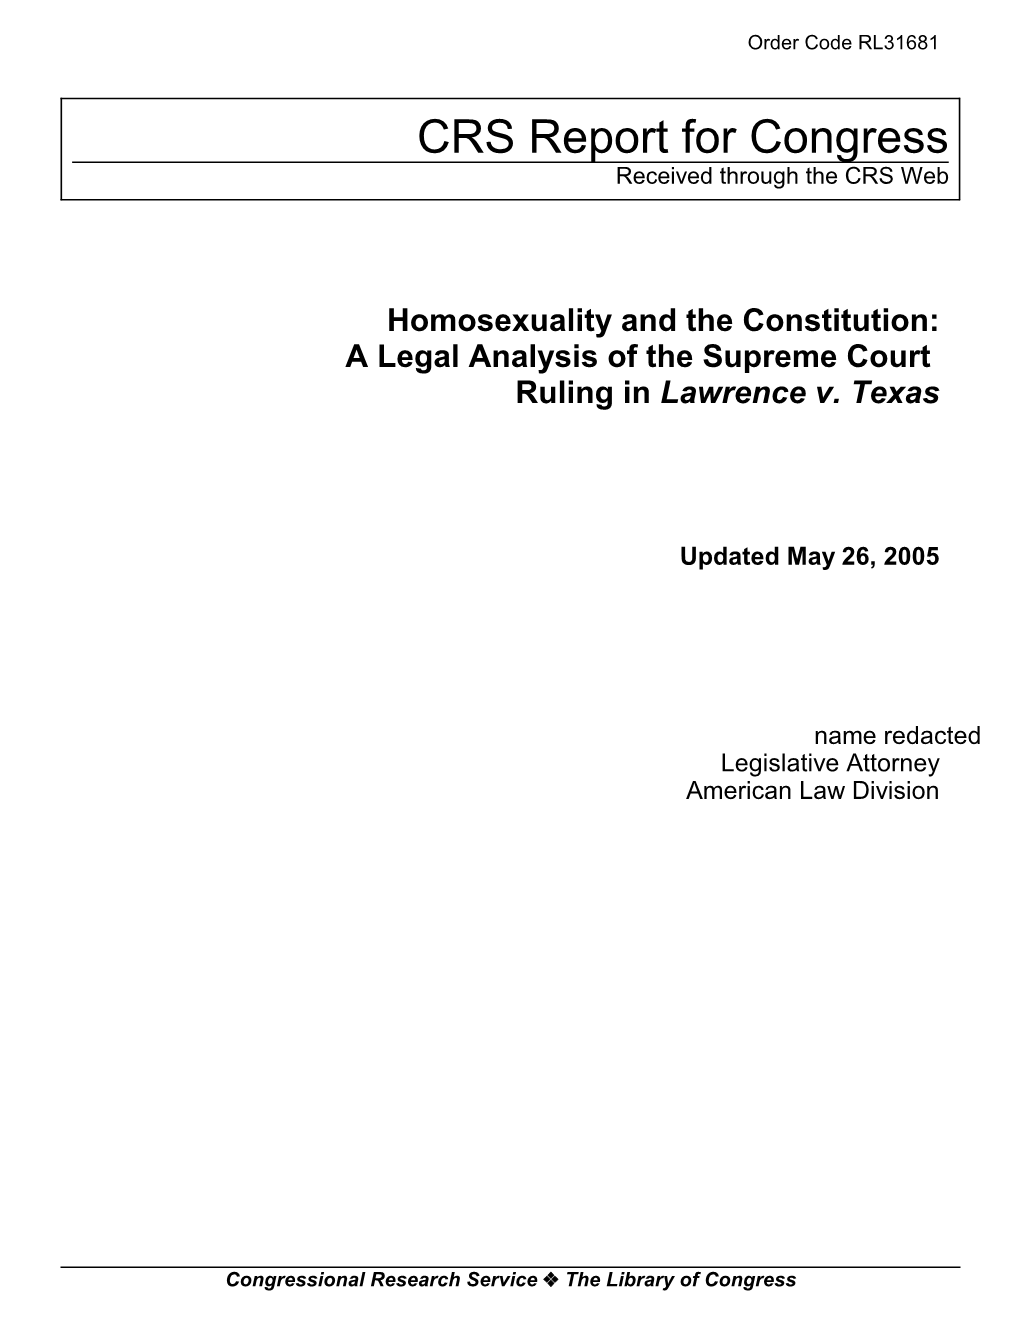 Homosexuality and the Constitution: a Legal Analysis of the Supreme Court Ruling in Lawrence V